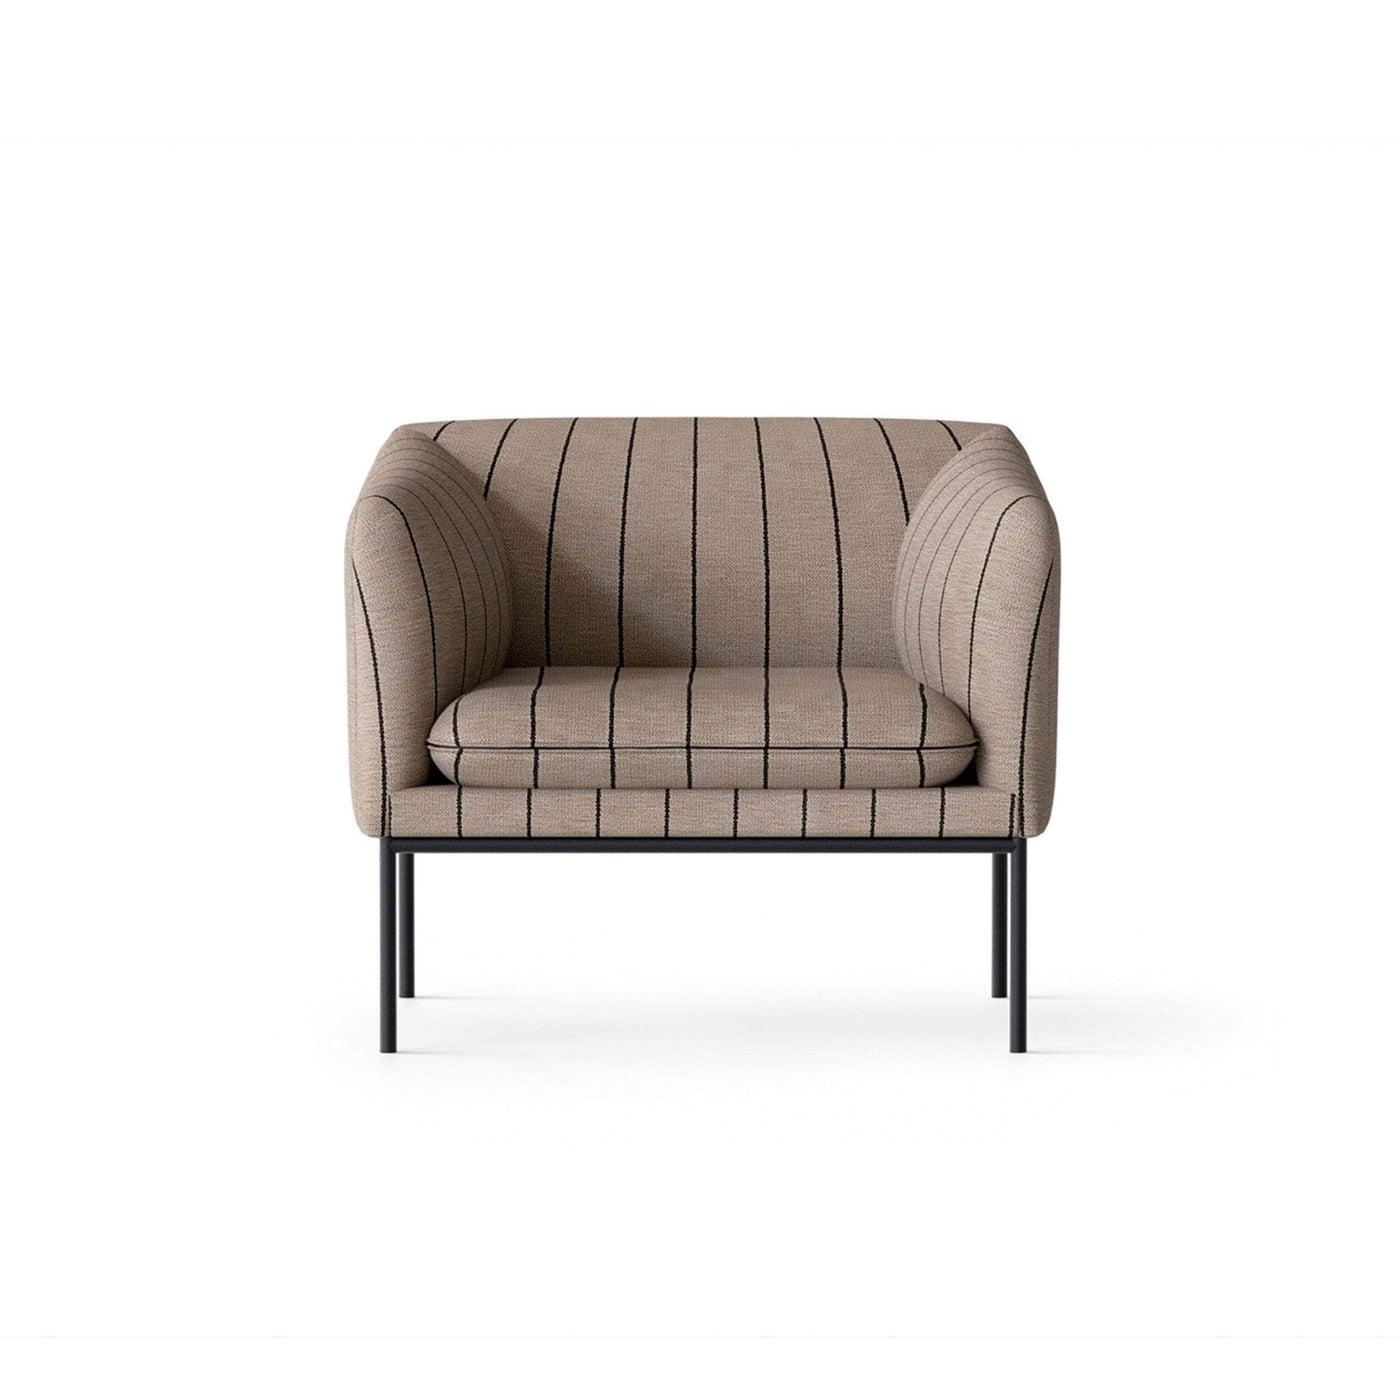 Ferm Living Turn 1 seater with black frame. Shop online at someday designs. #colour_pasadena